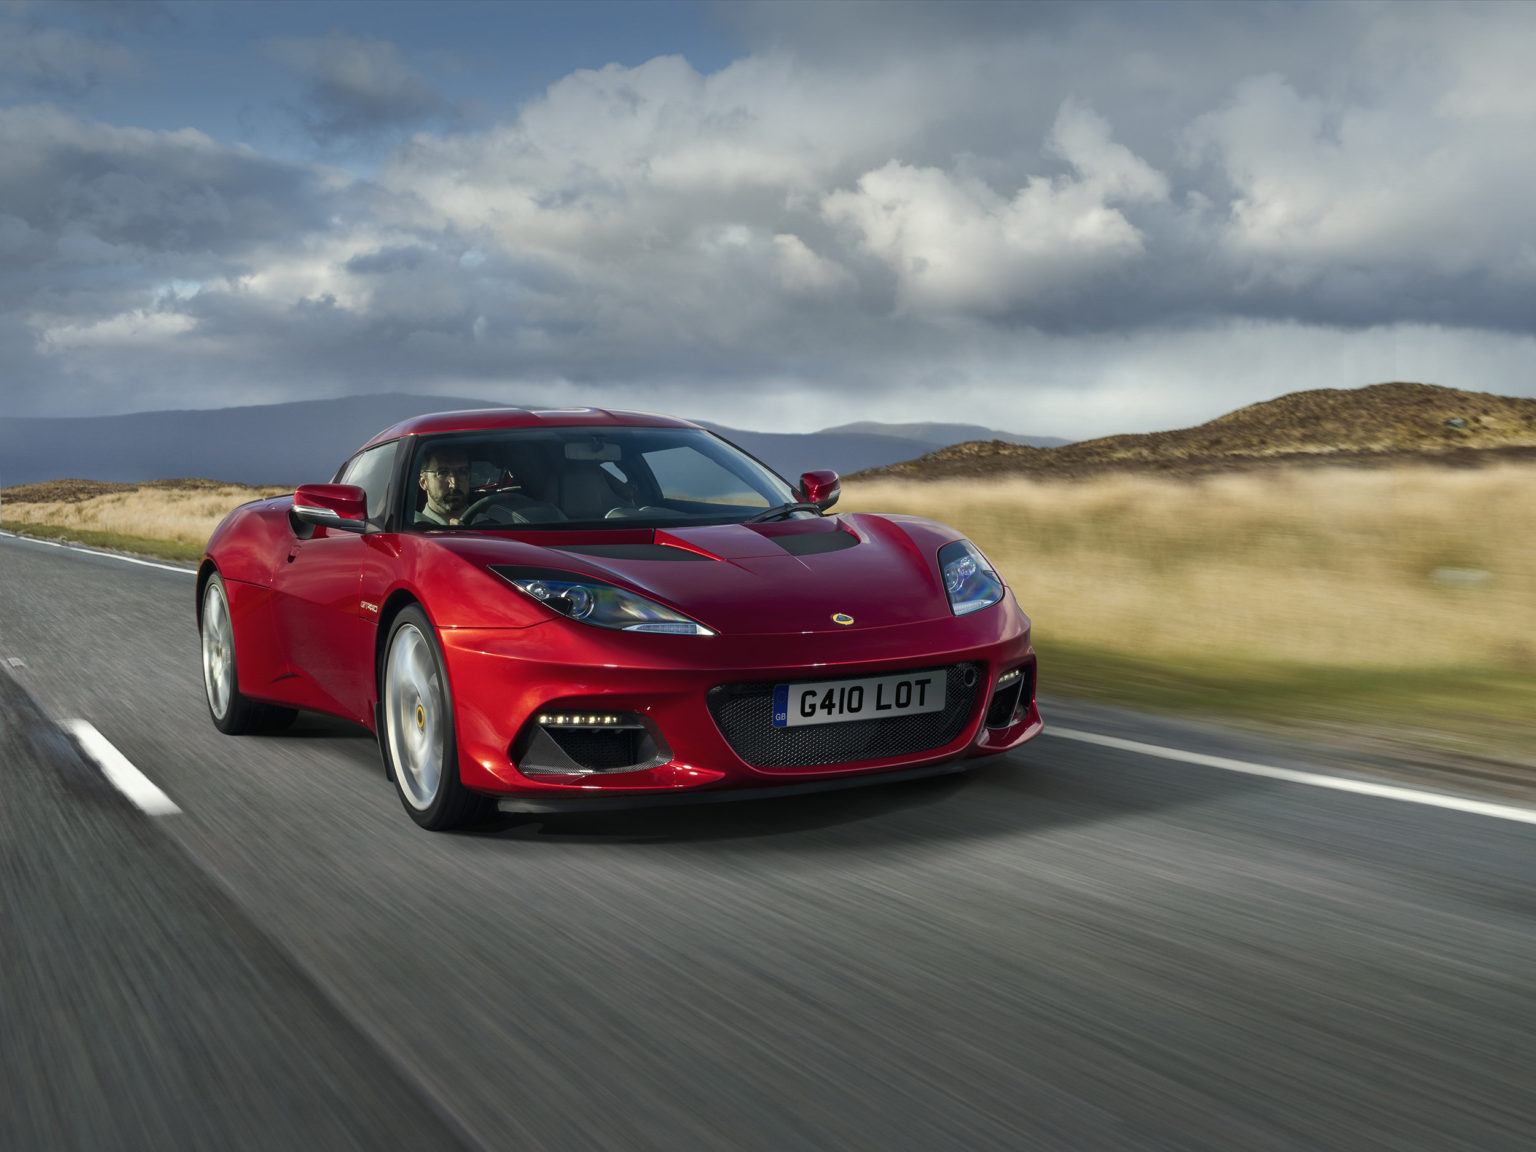 Lotus is adding a model meant more for daily driving than the sporty cars it's been producing lately.